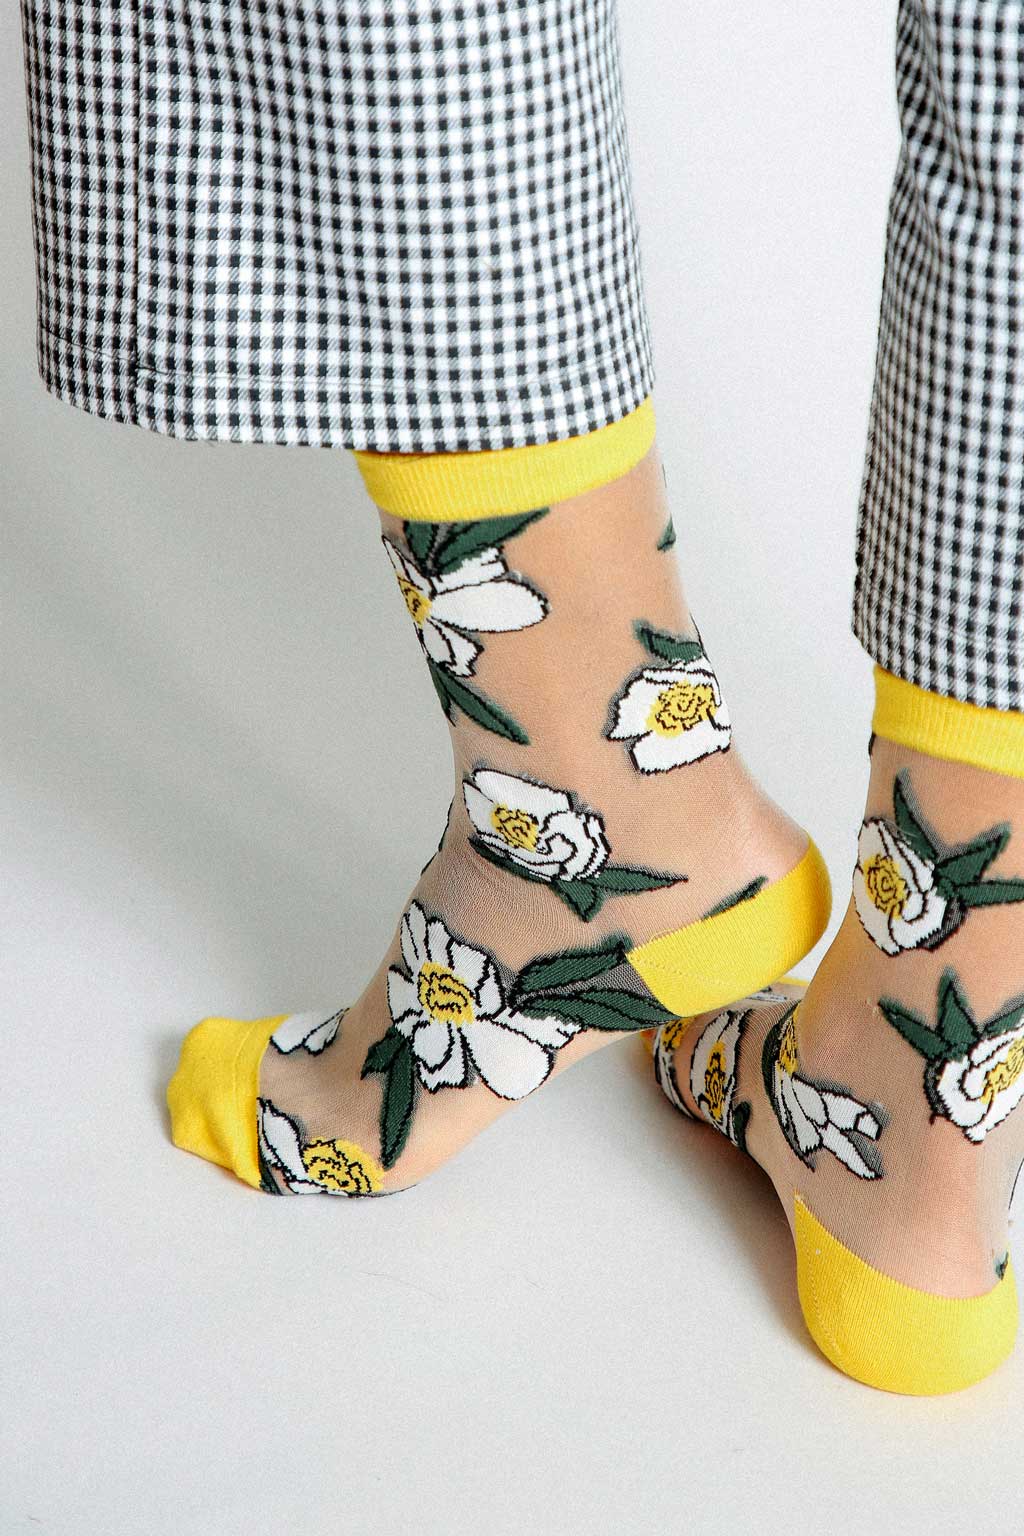 Sheer Floral Socks - The Crowd Went Wild